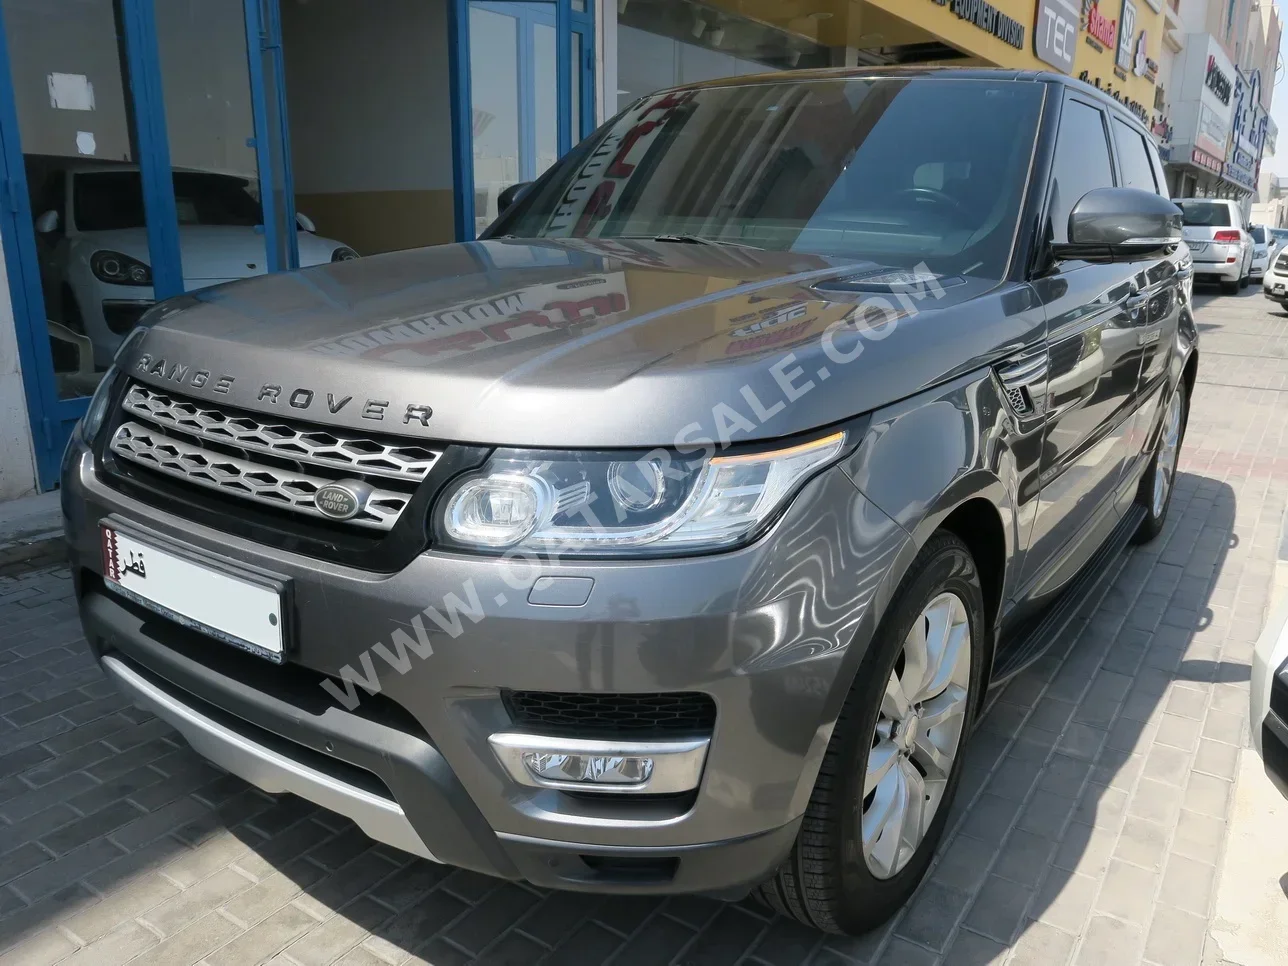 Land Rover  Range Rover  Sport Super charged HST  2014  Automatic  163٬000 Km  8 Cylinder  Four Wheel Drive (4WD)  SUV  Gray